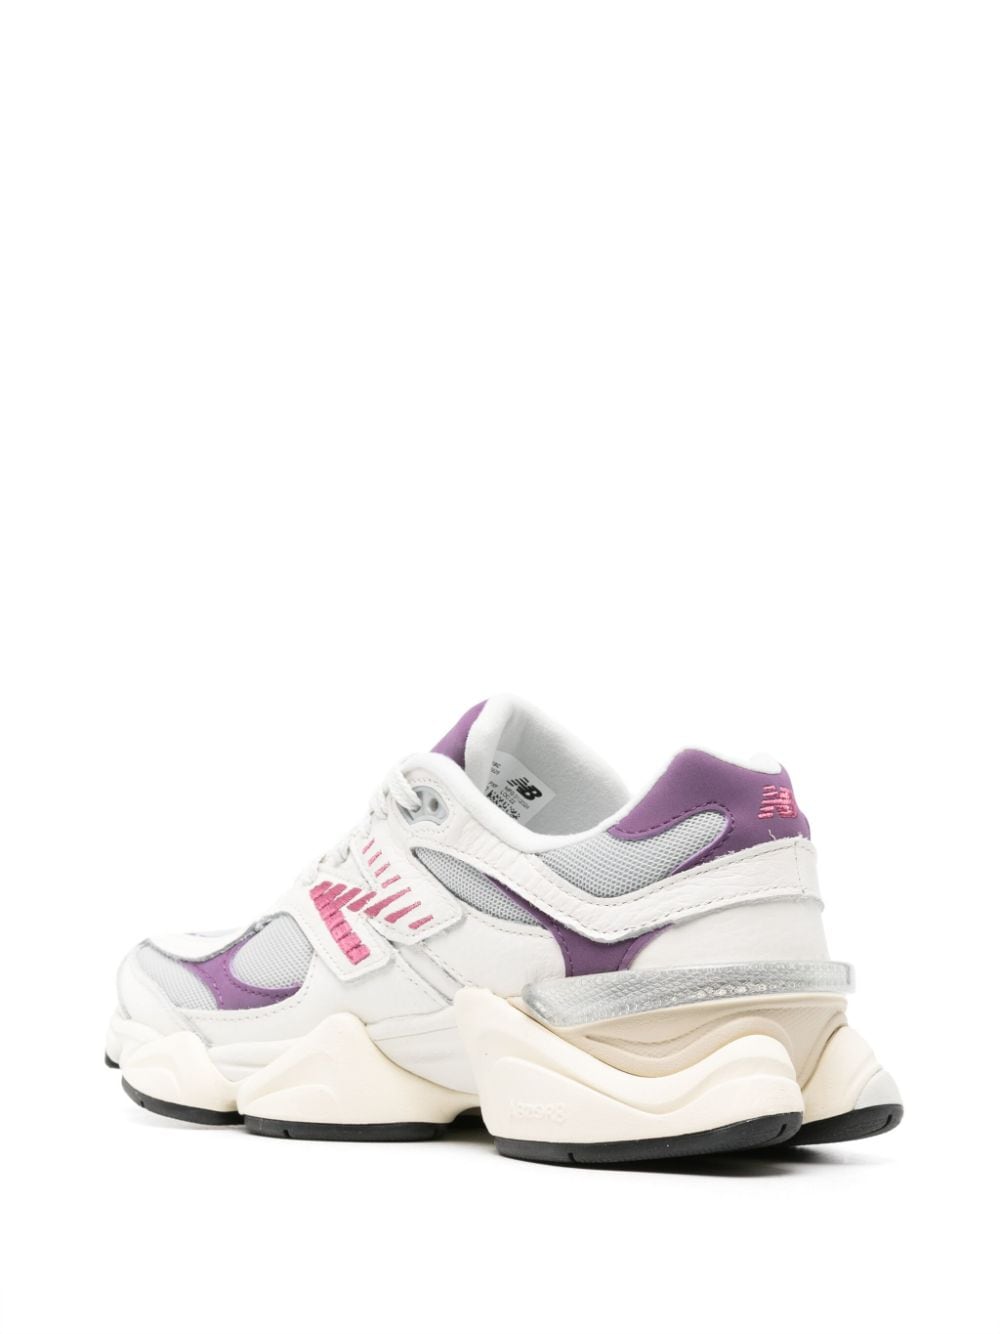 New Balance Sneakers White